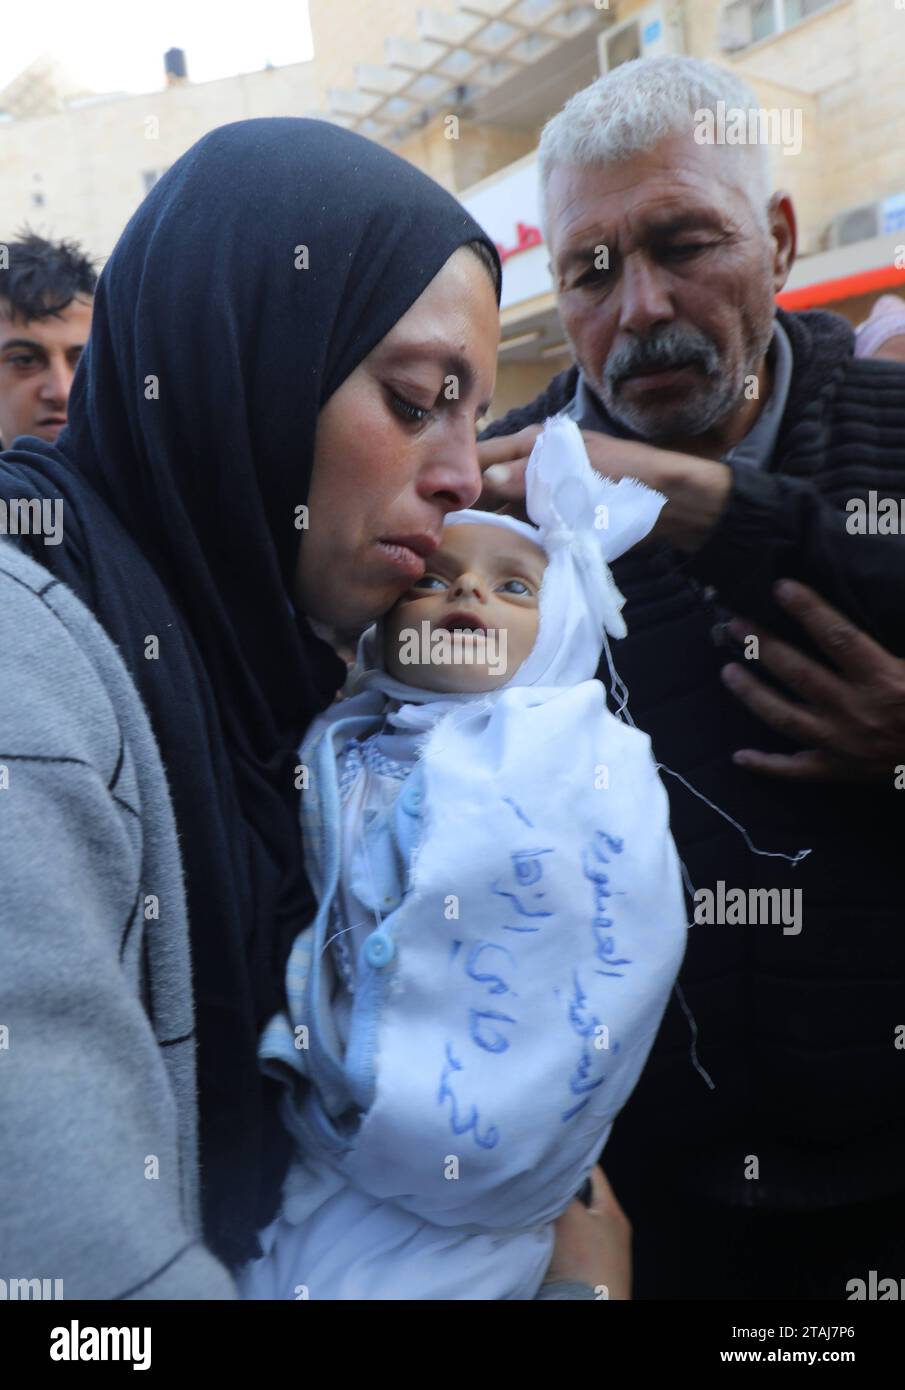 Dead body of a 5-month-old Palestinian baby named Muhammad Hani Al-Zahar, is brought to the Al-Aqsa Martyrs Hospital Dead body of a 5-month-old Palestinian baby named Muhammad Hani Al-Zahar, is brought to the Al-Aqsa Martyrs Hospital by his mother Asmahan Attia Al-Zahar and grandfather Attia Abu Amra after the Israeli airstrikes at the end of the humanitarian pause in Deir Al-Balah, Gaza on December 1, 2023. 32 Palestinians were killed within 3 hours of the end of the humanitarian pause in Gaza. Photo by Omar Ashtawy apaimages Dair El-Balah Gaza Strip Palestinian Territory 011223 Dair Balah OS Stock Photo